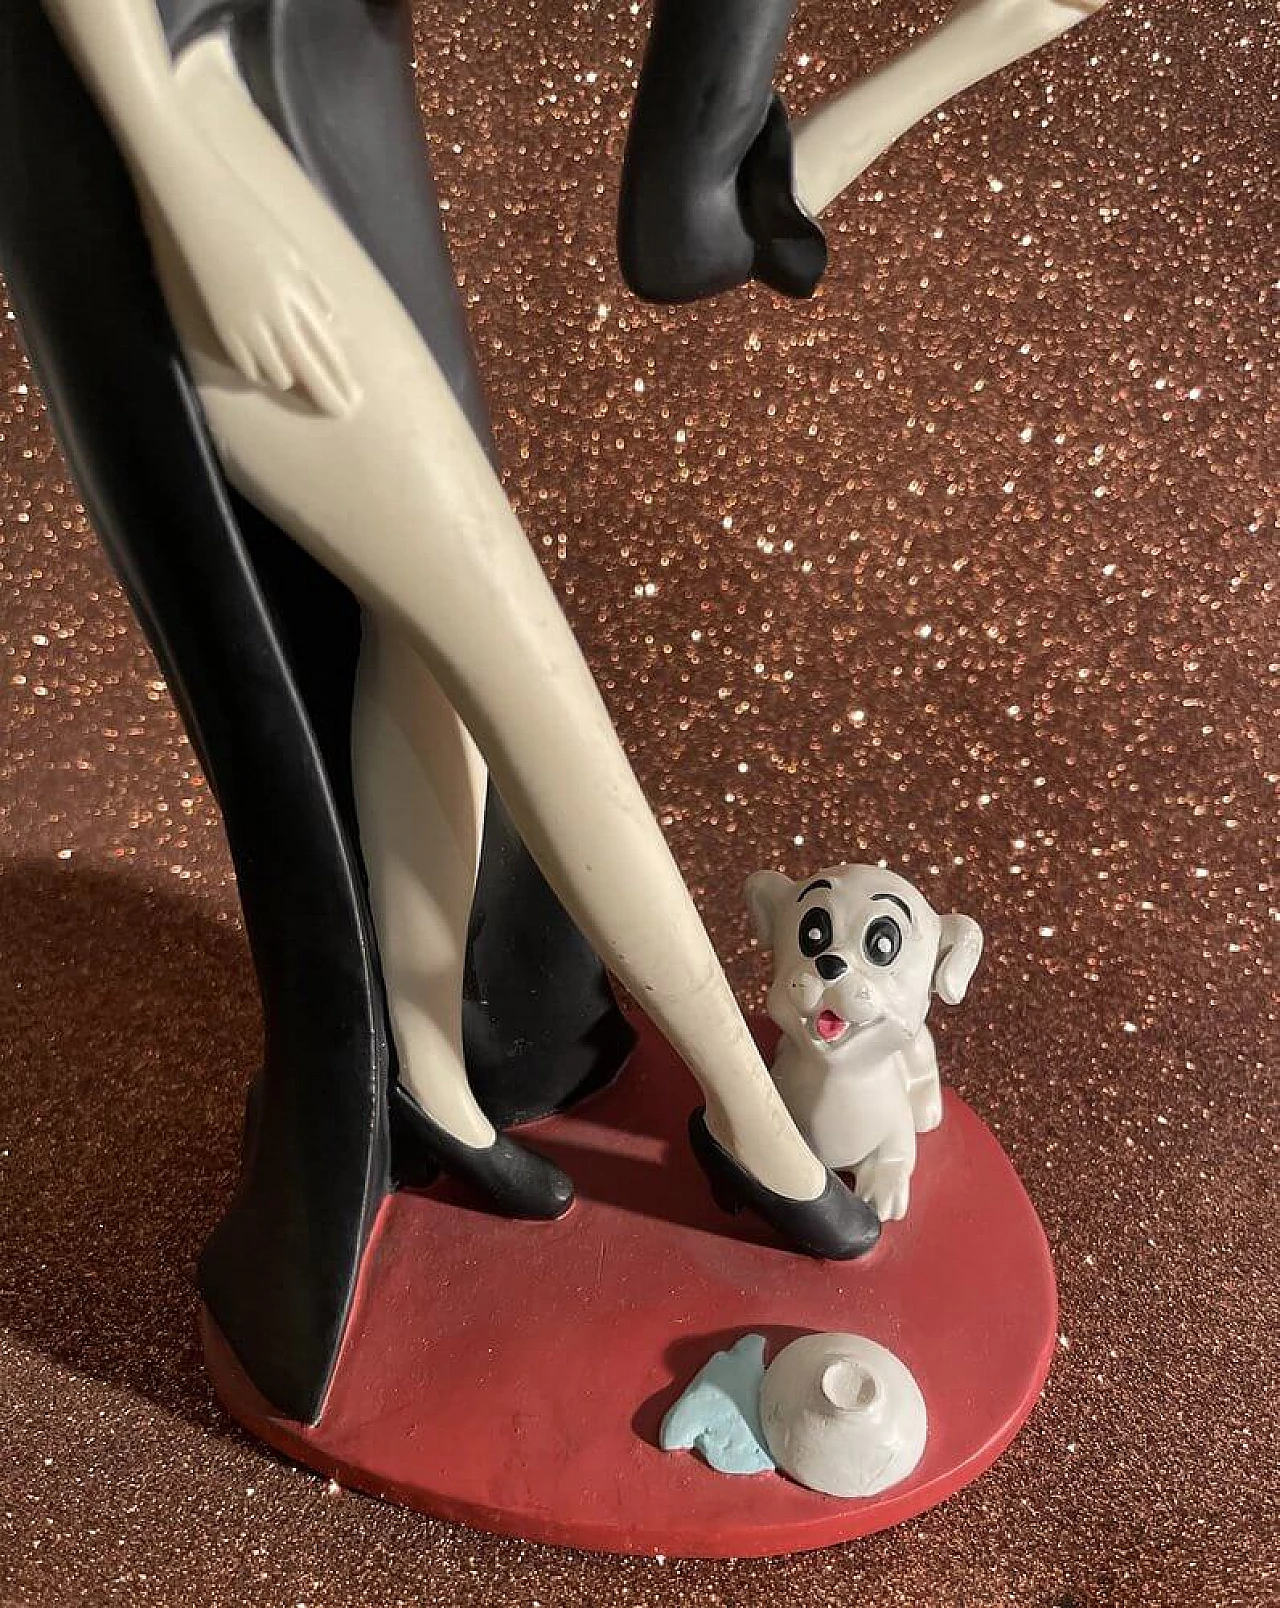 Betty Boop collectible figurine with black dress and small dog by Fleischer Studios, 2007 2